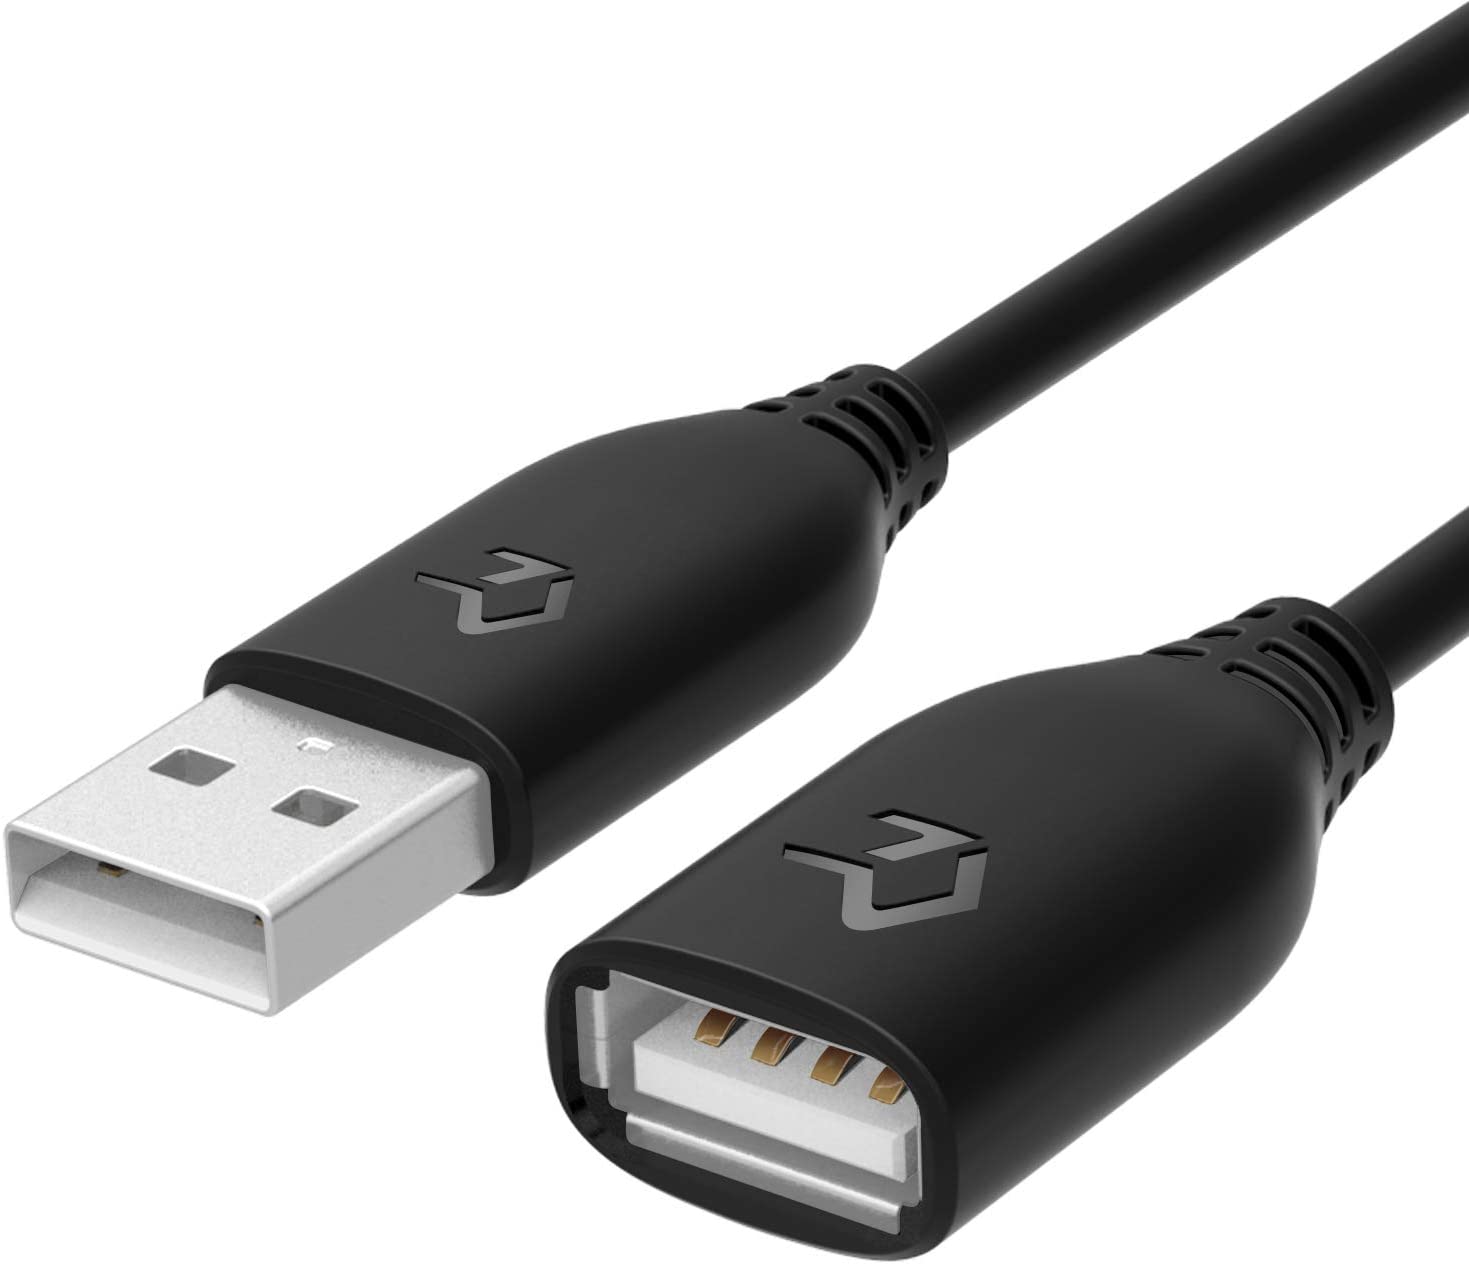 Rankie USB 2.0 Extension Cable, A-Male to A-Female, 6 Feet, Black - e4cents